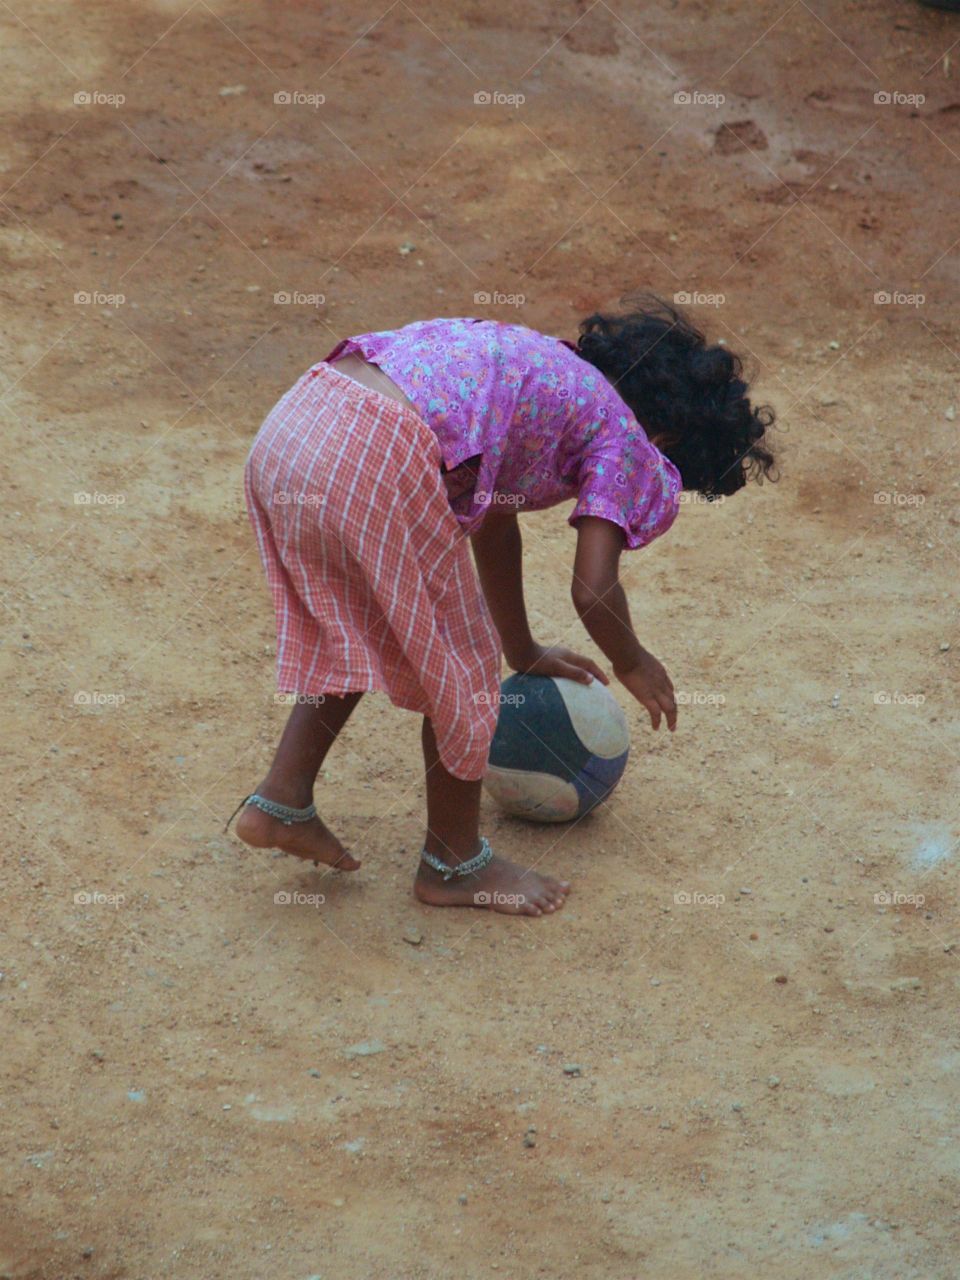 A young person having fun with a soccer ball
